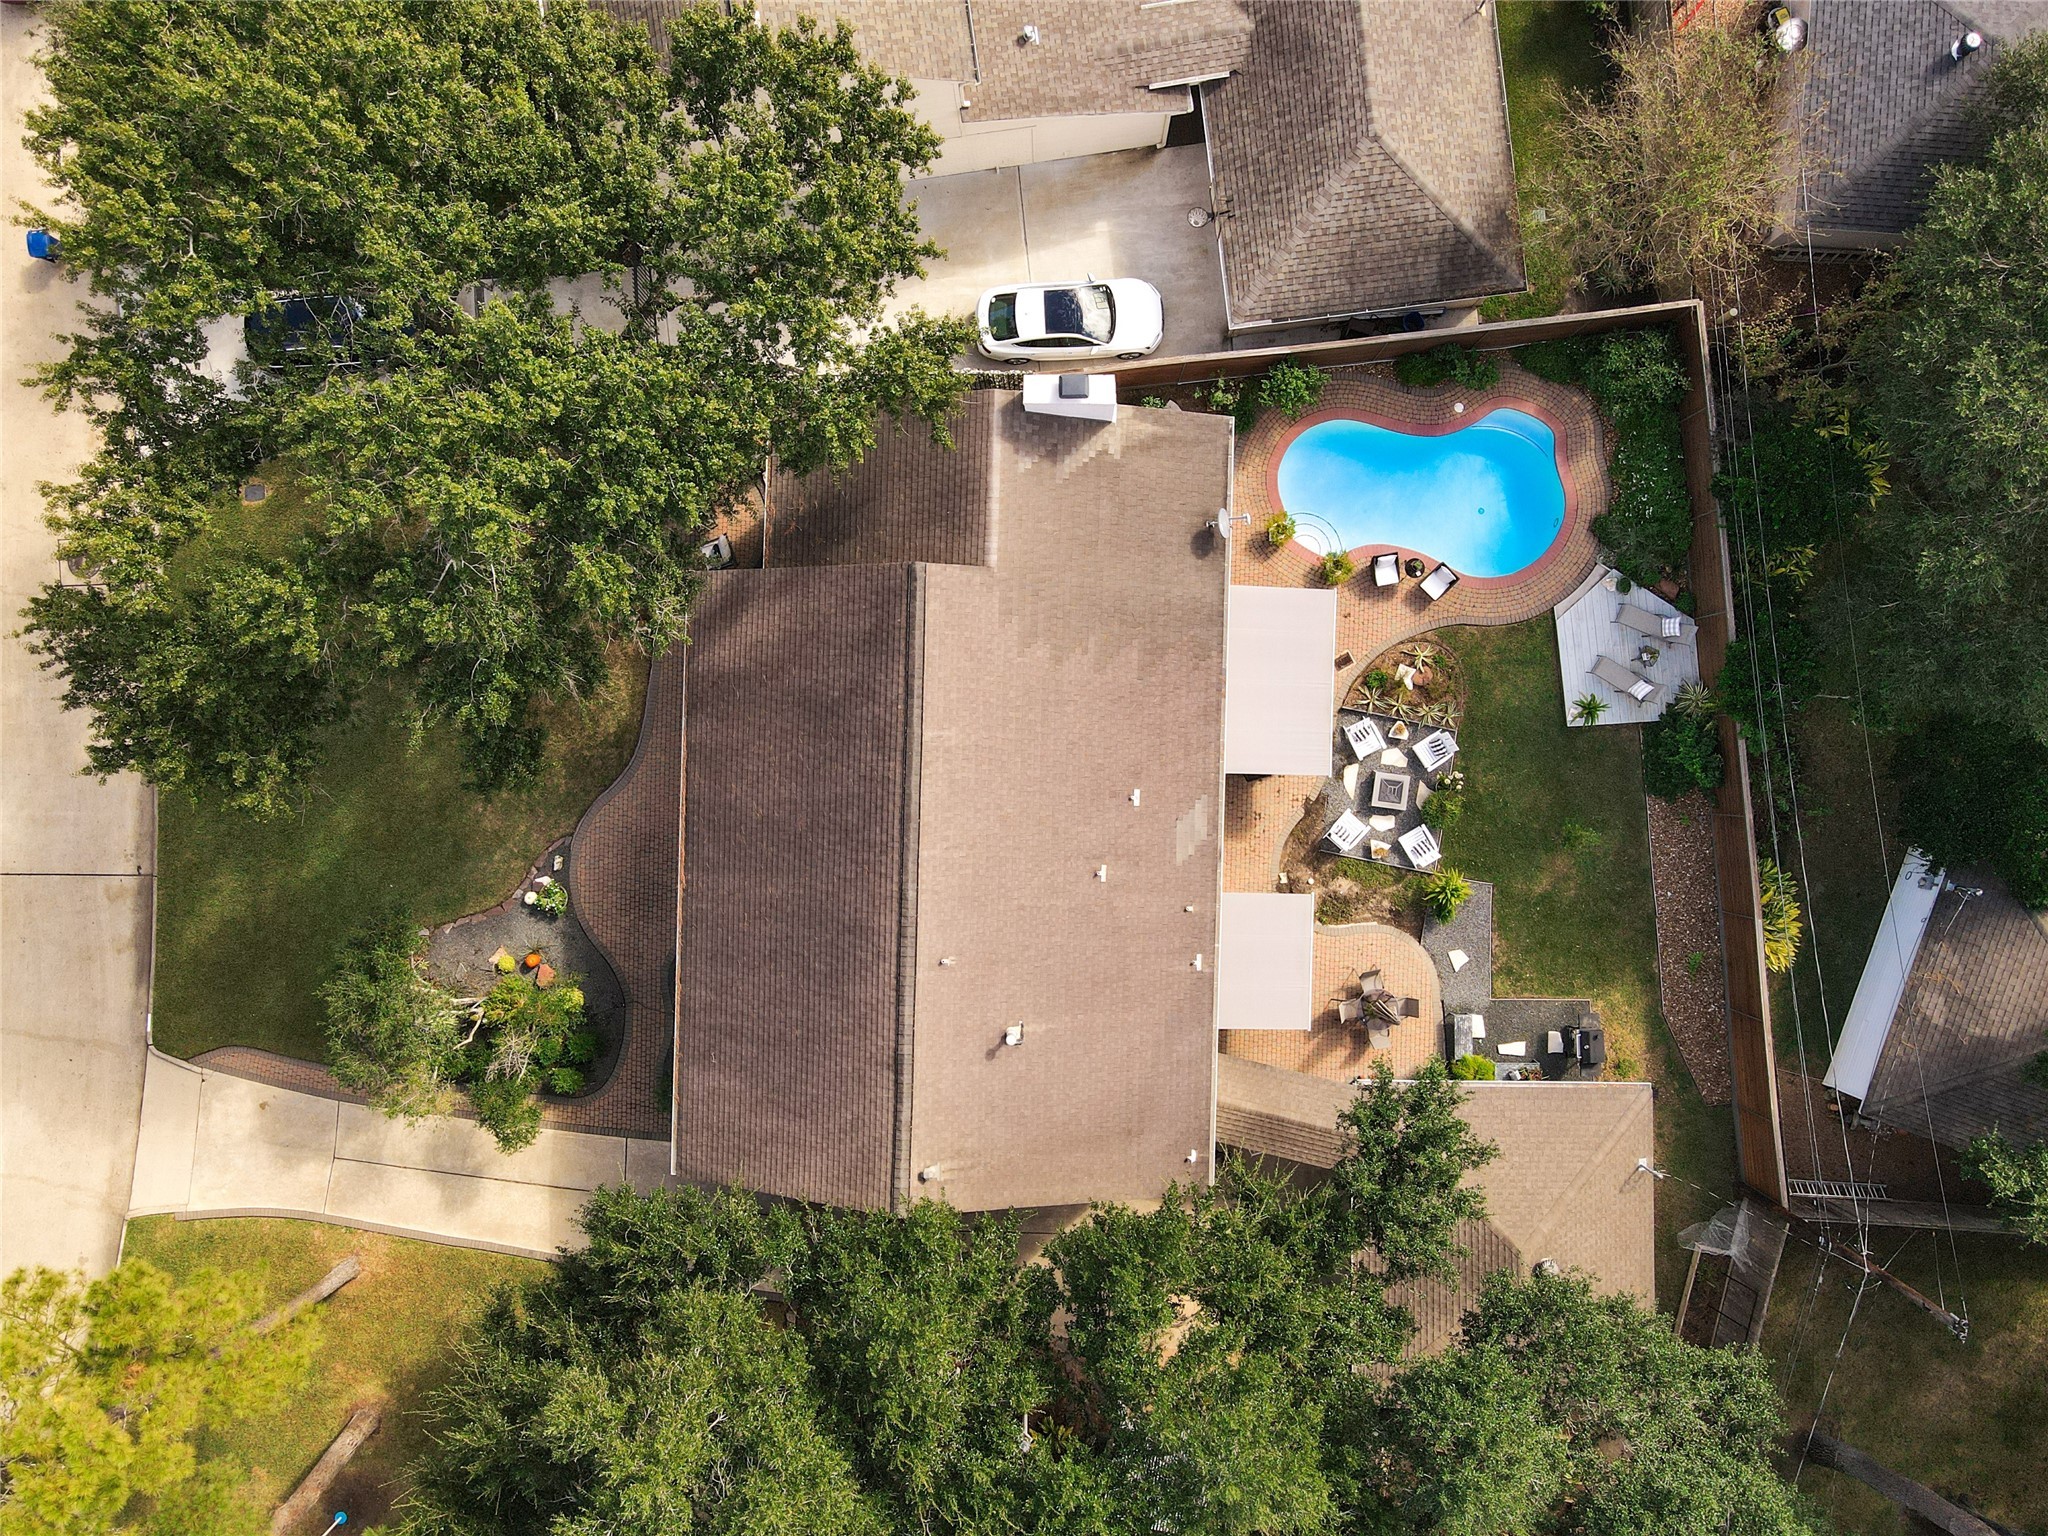 This rare Pie Estate lot has a double wide backyard that offers plenty of room for a pool, green space, and a garden!